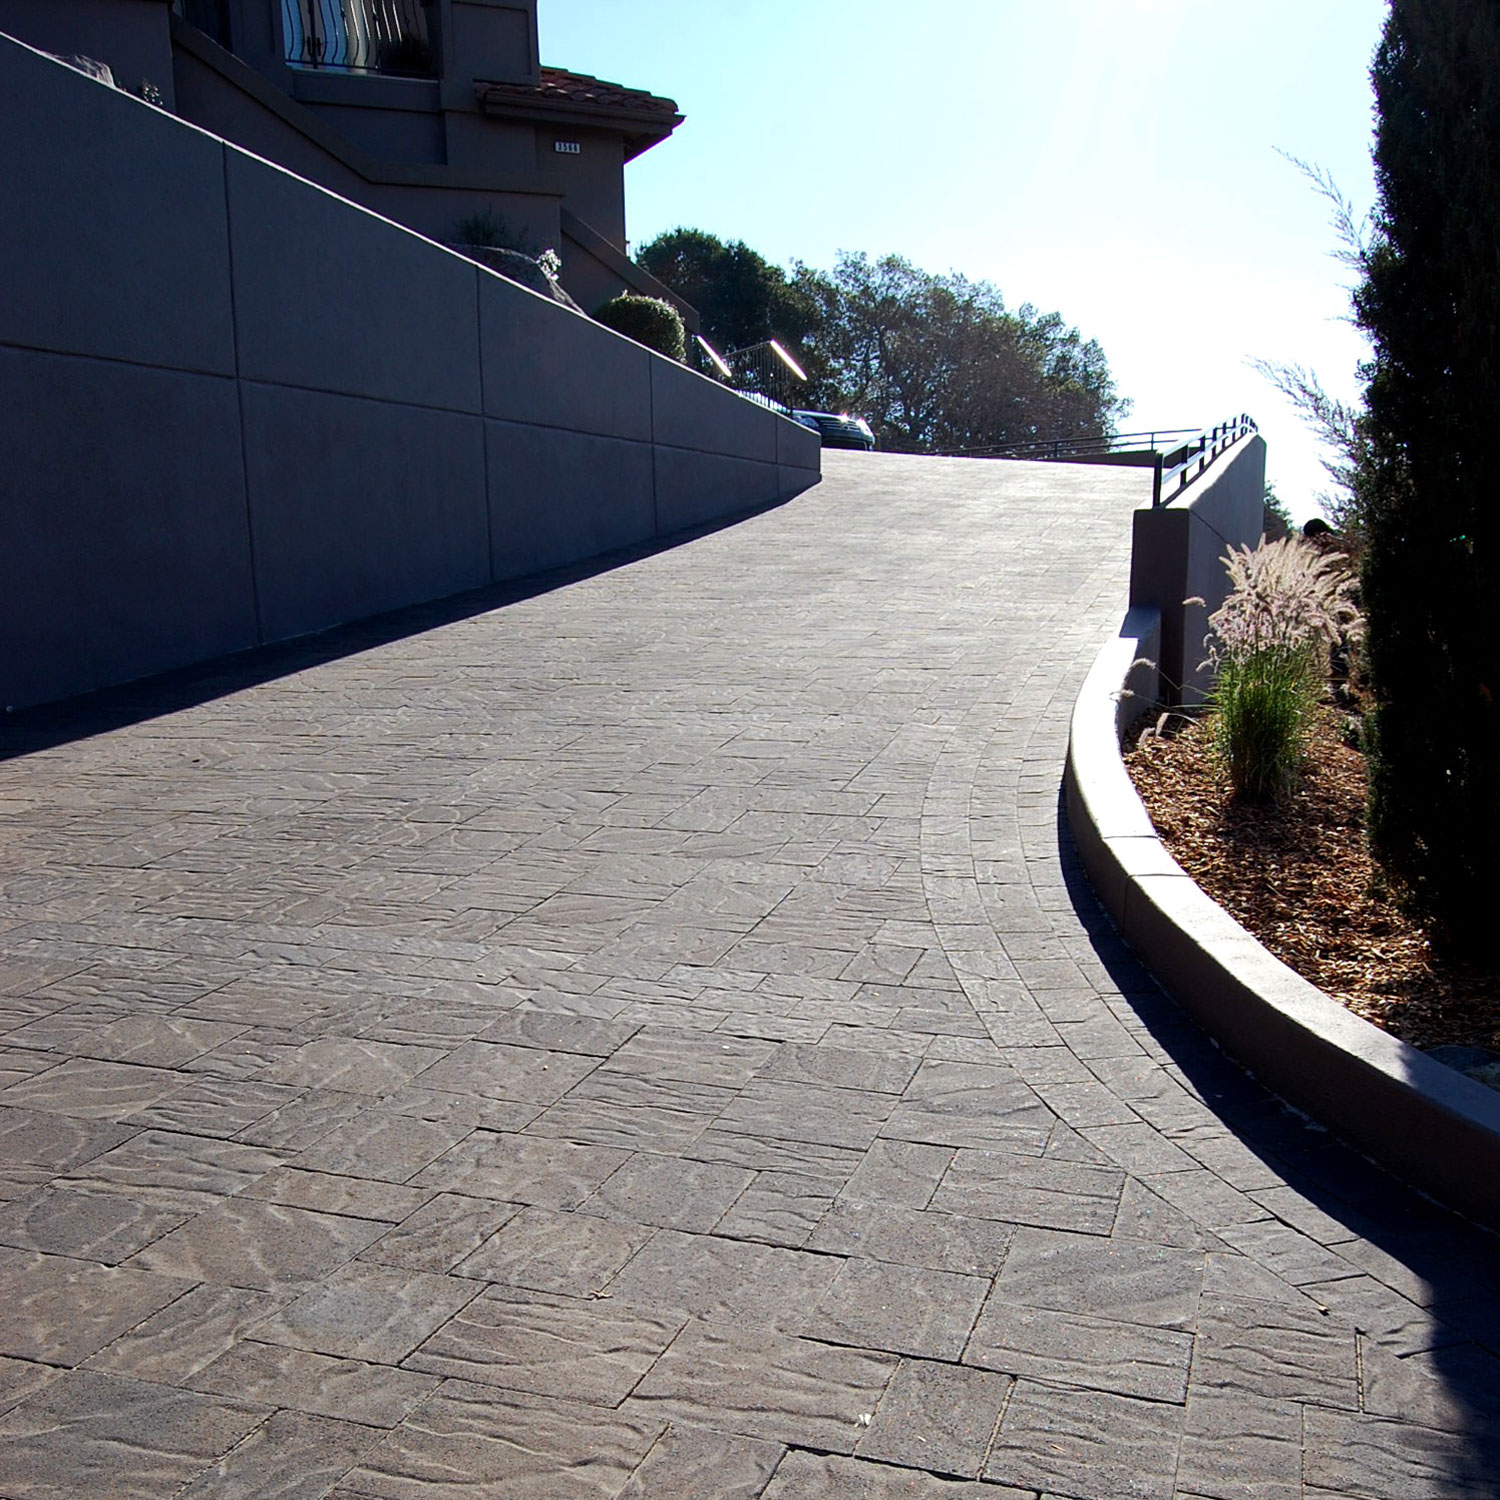 Steep driveway is made safer with stone pavers.